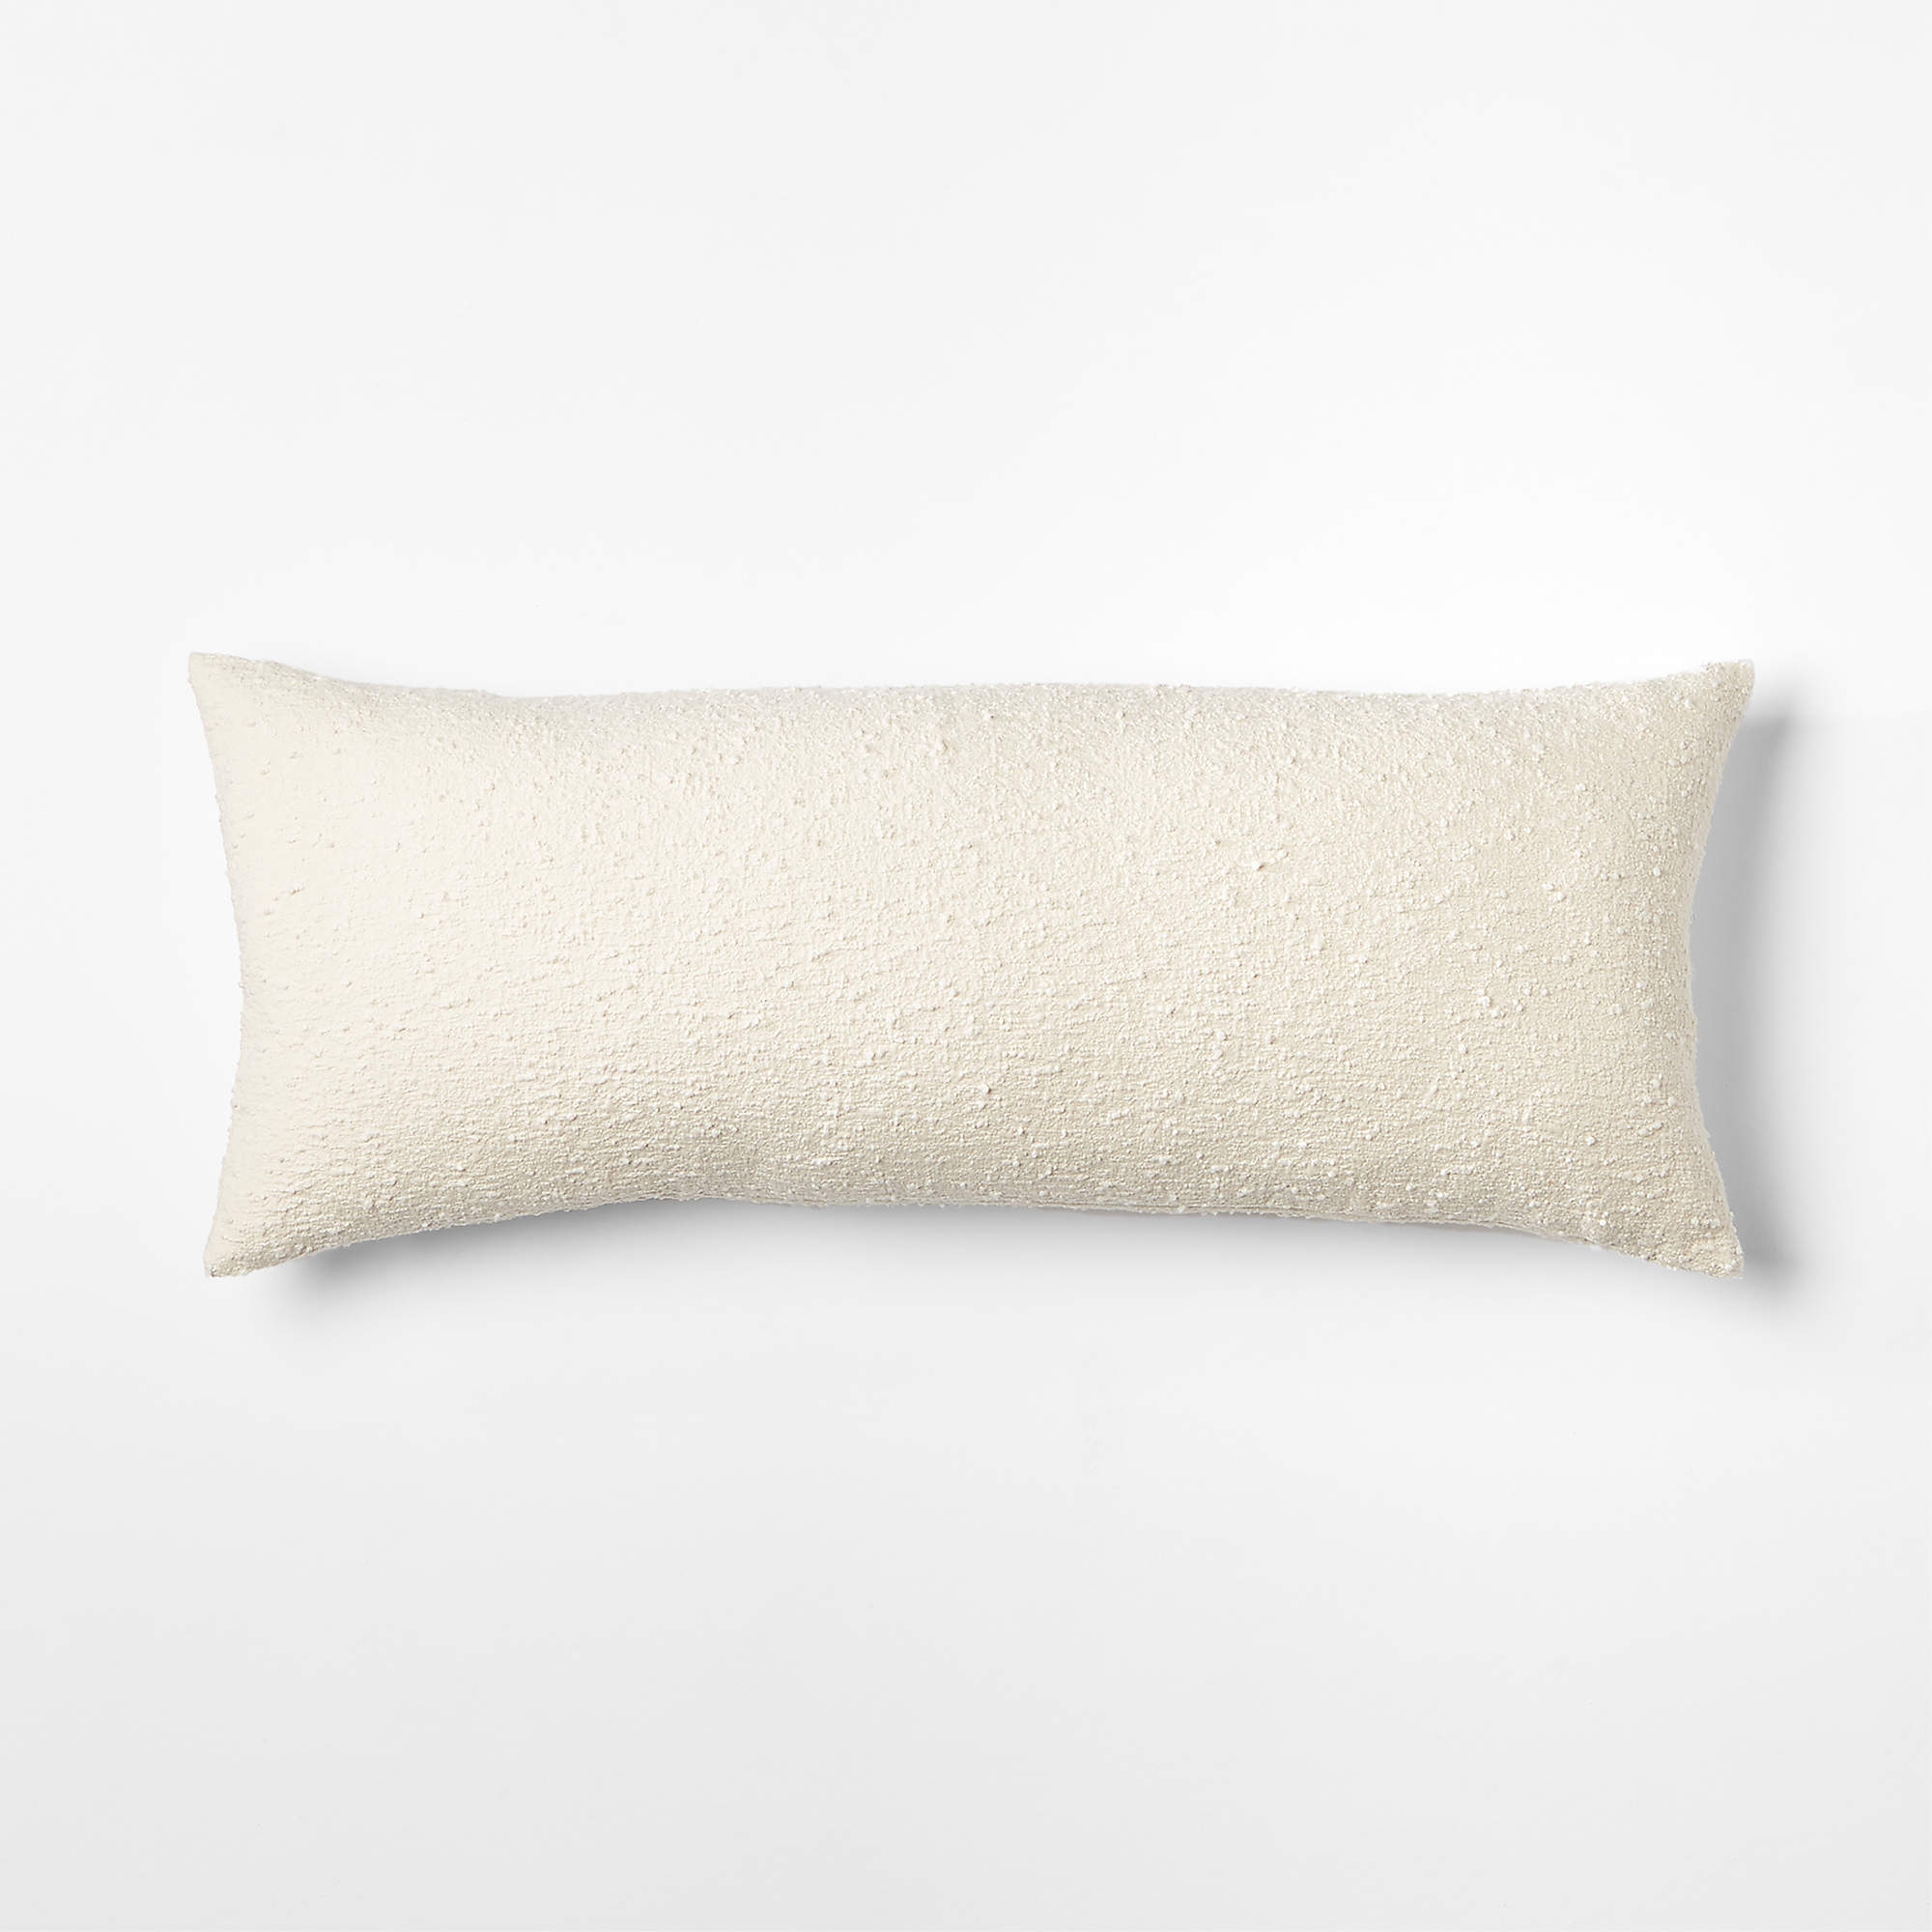 Ivory Boucle Throw Pillow with Down-Alternative Insert 36"x16" - Image 1